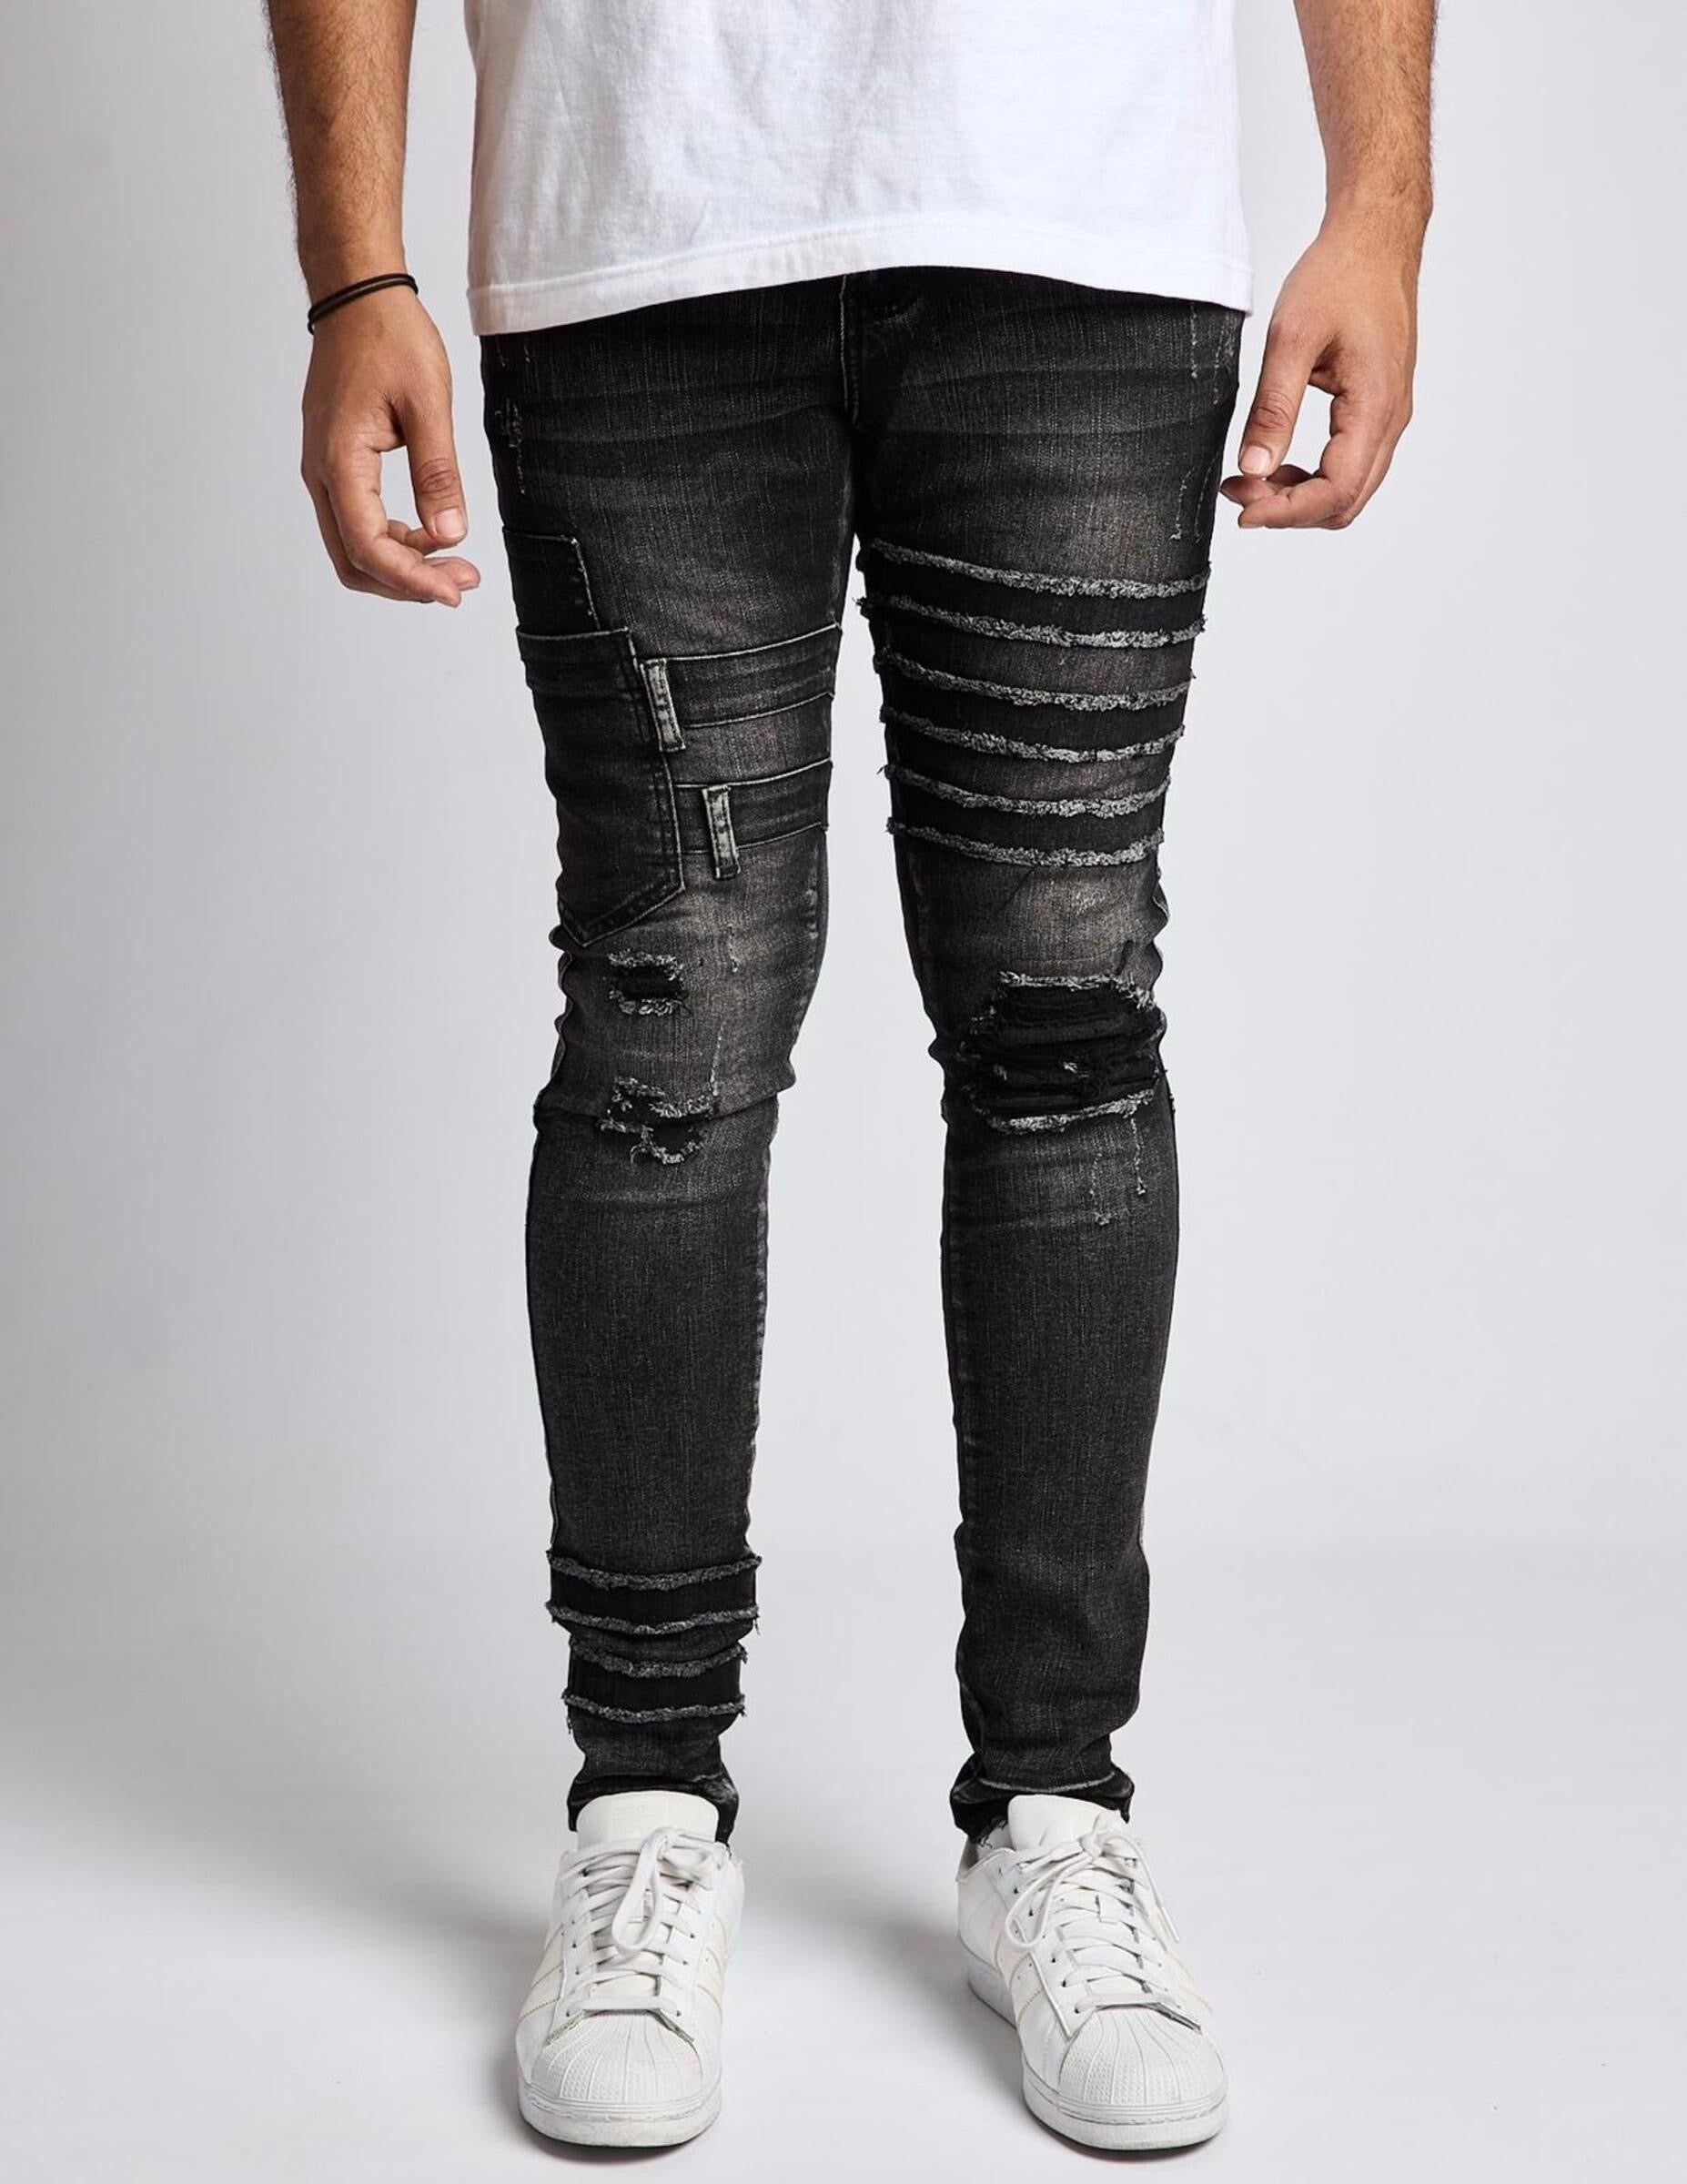 Damati-Repaired Jeans-DMT-C-70 – Todays Man Store